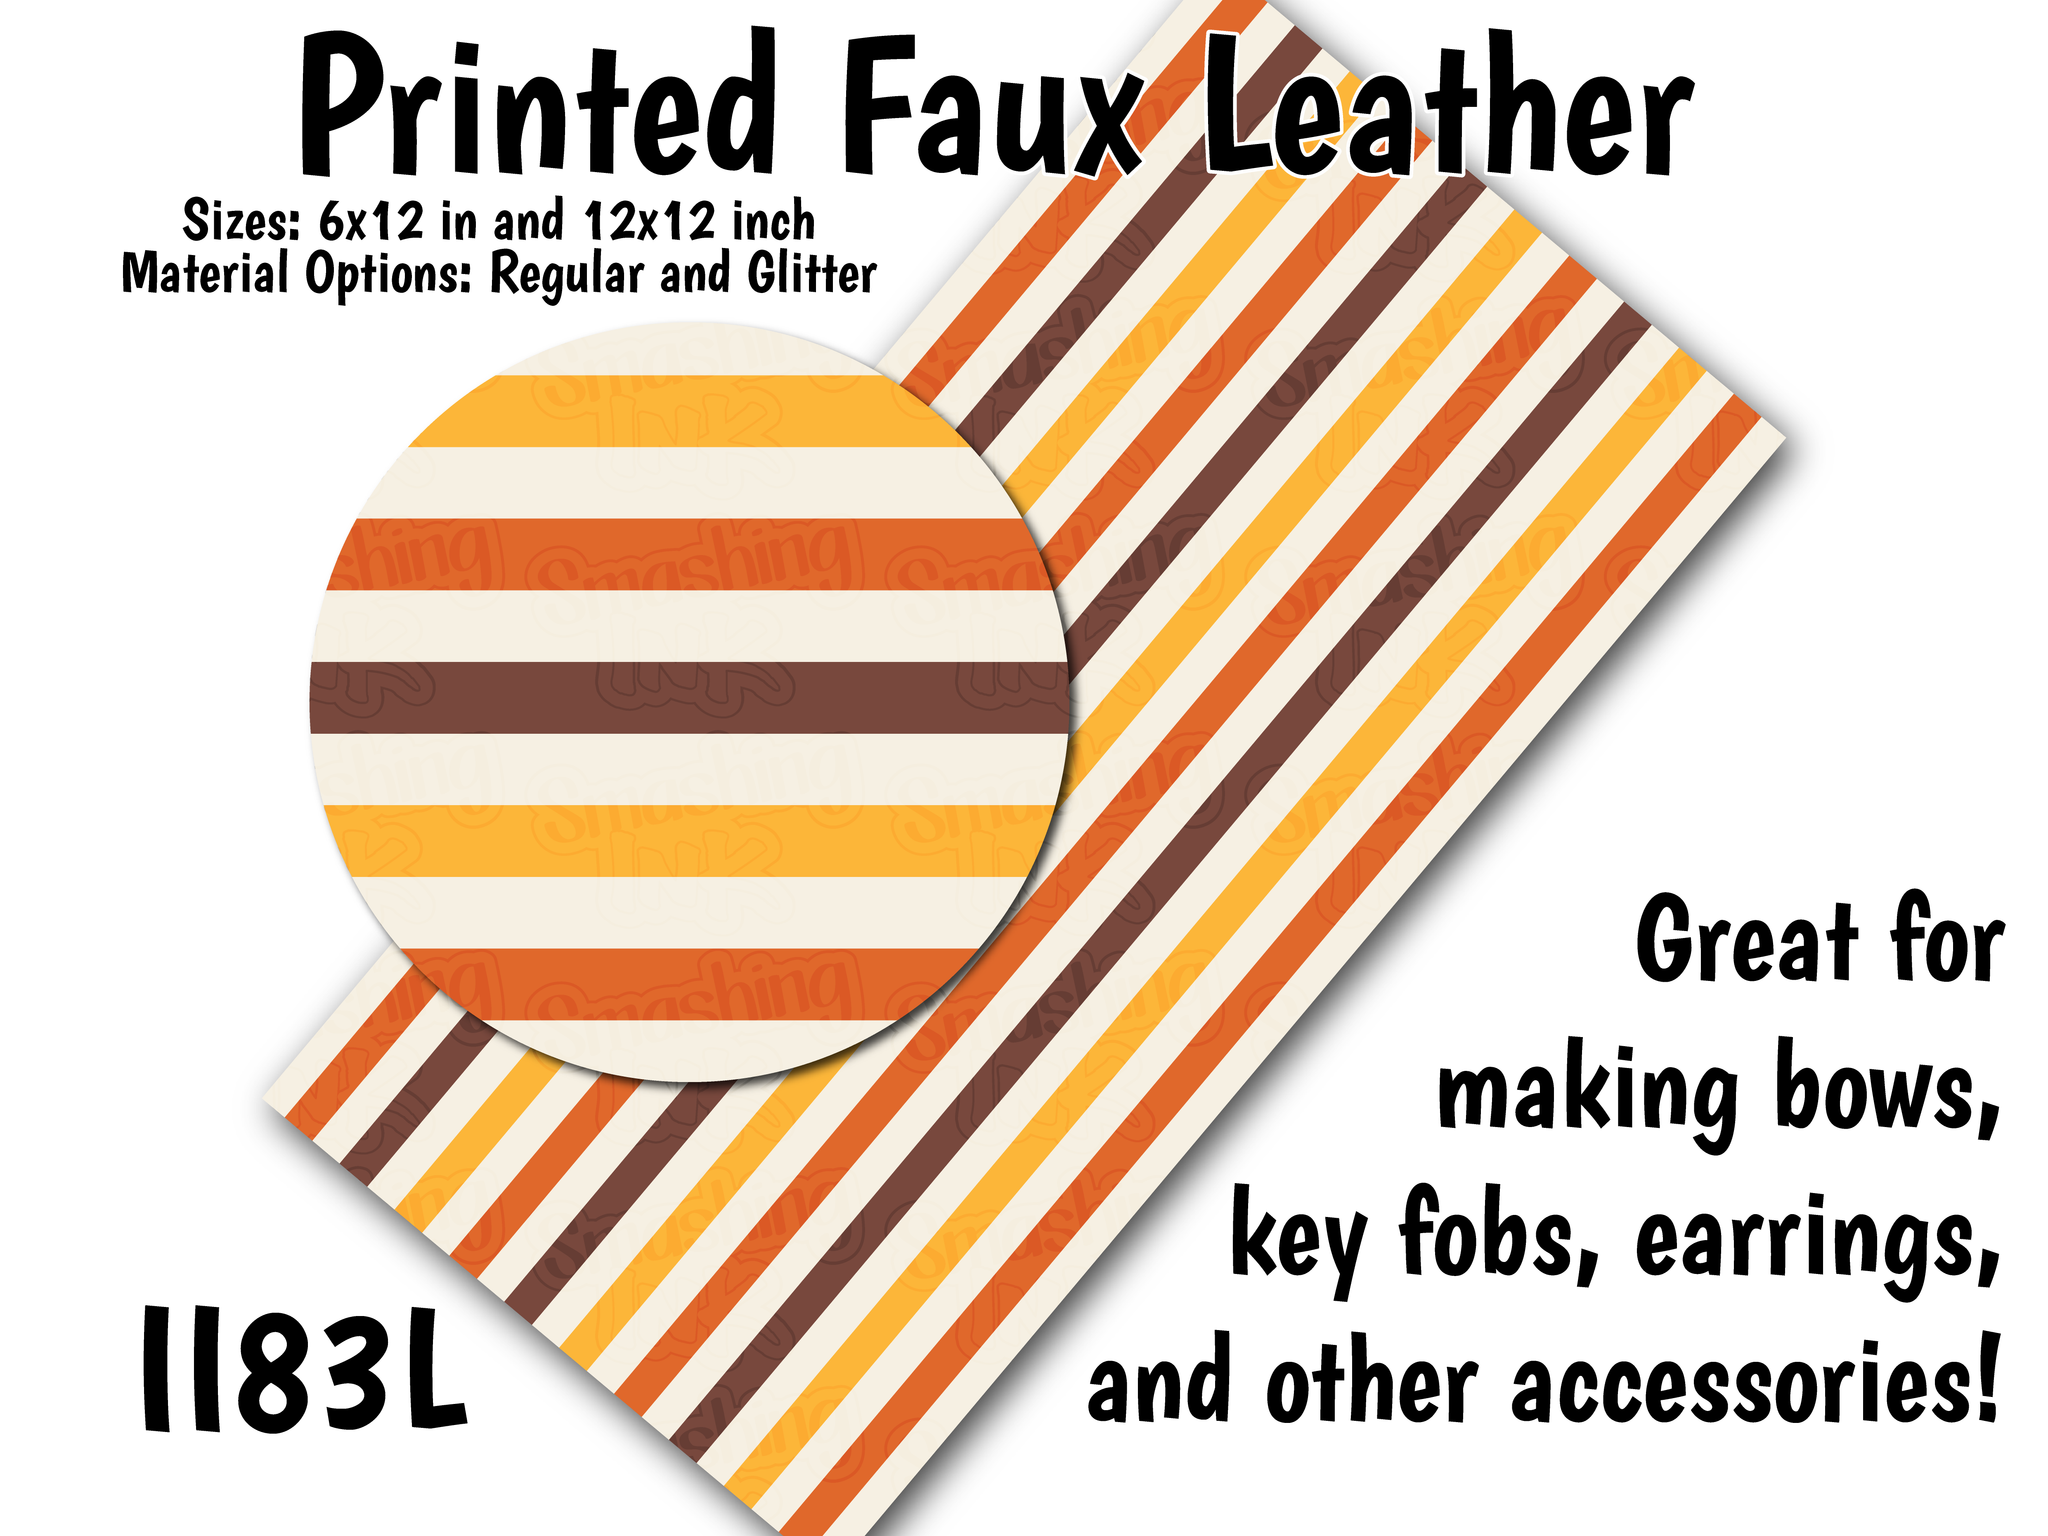 Fall Pattern - Faux Leather Sheet (SHIPS IN 3 BUS DAYS)